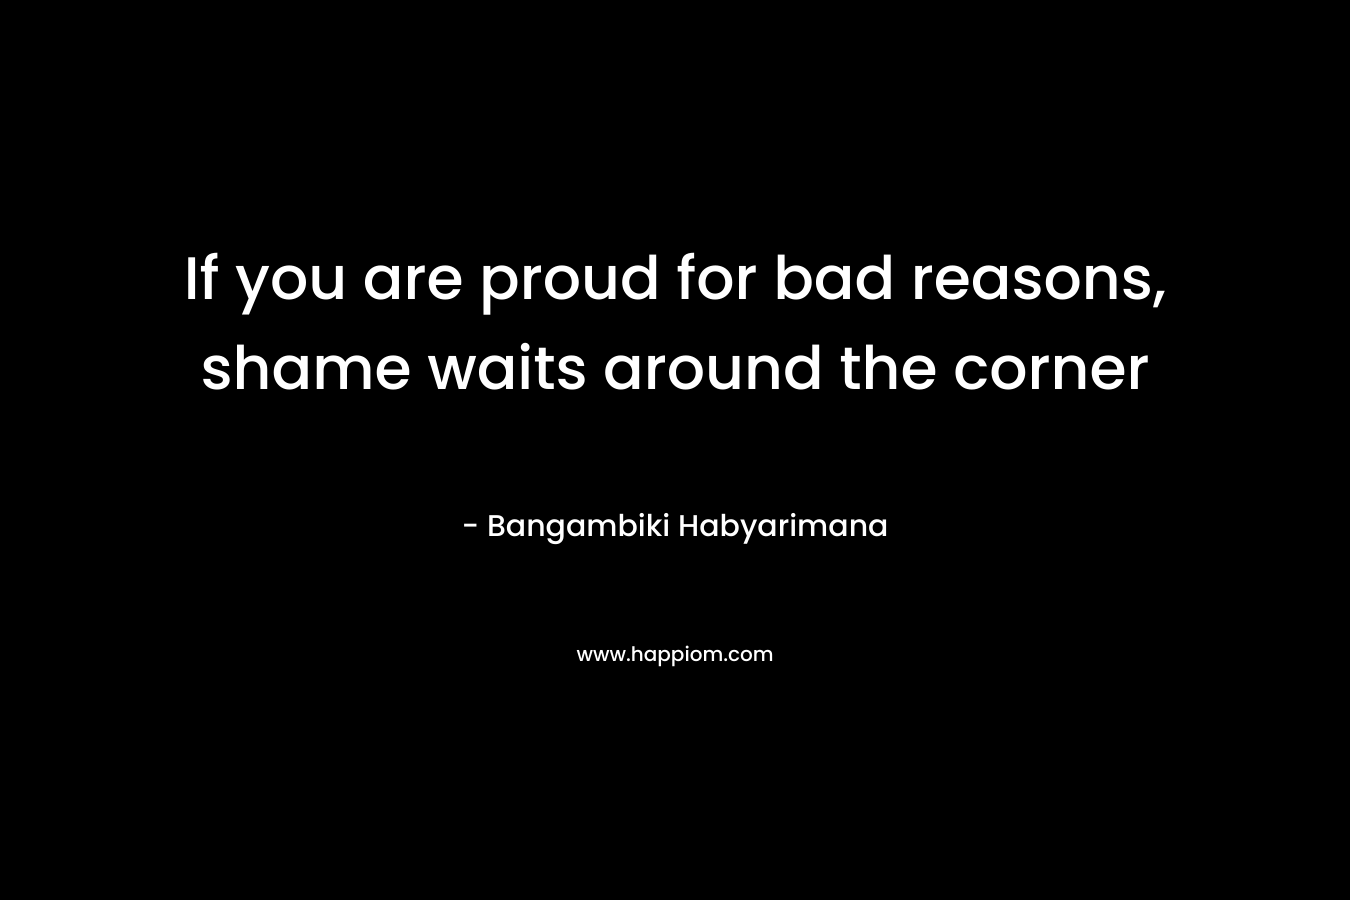 If you are proud for bad reasons, shame waits around the corner